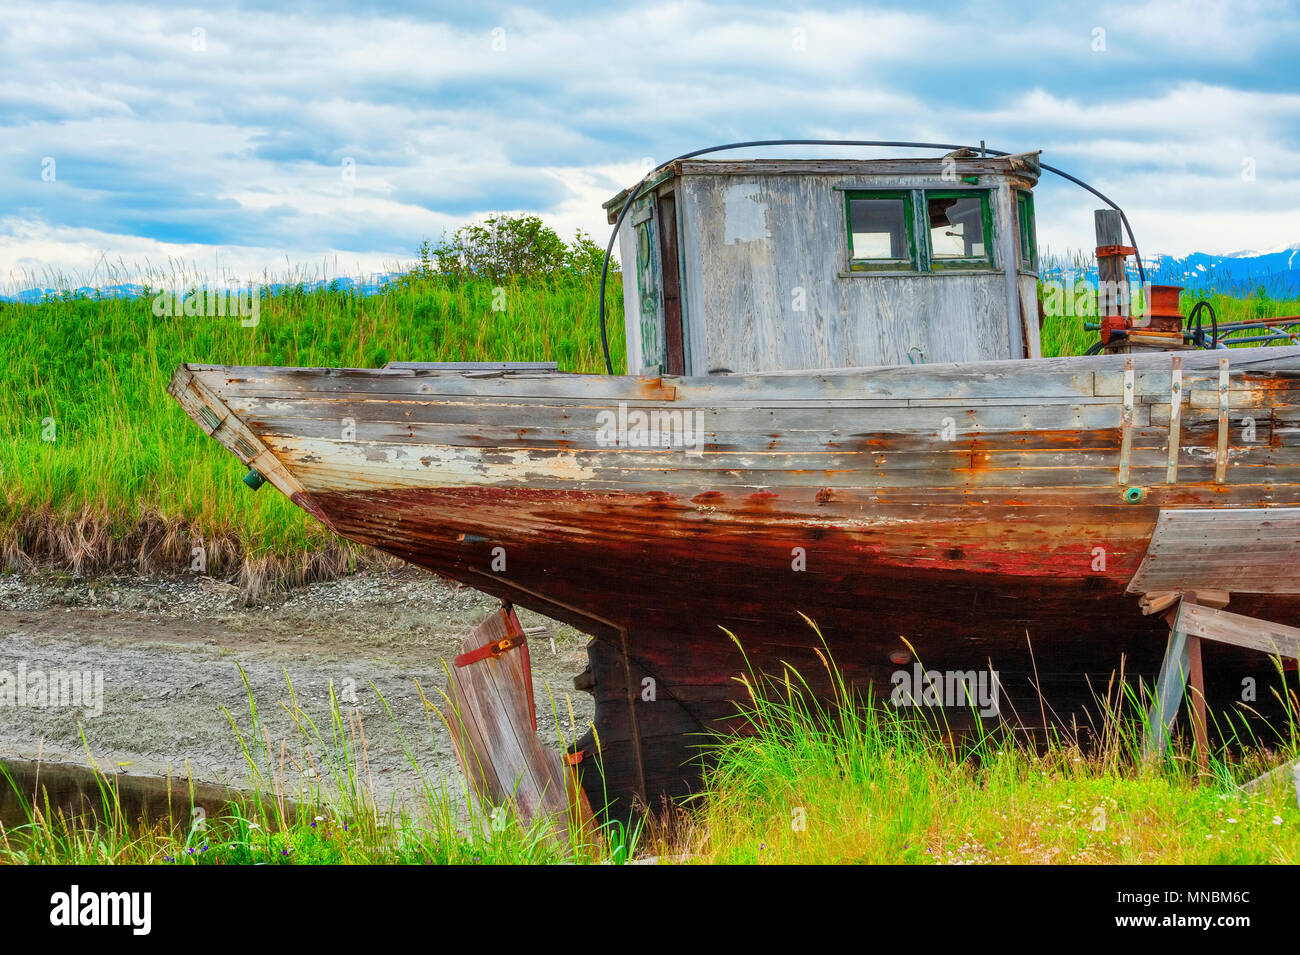 Decaying abandonded boat sitting in a dry dock rack in a grassy field seen from walking path along the shores of Kachemak Bay in Homer Alaska. Stock Photo